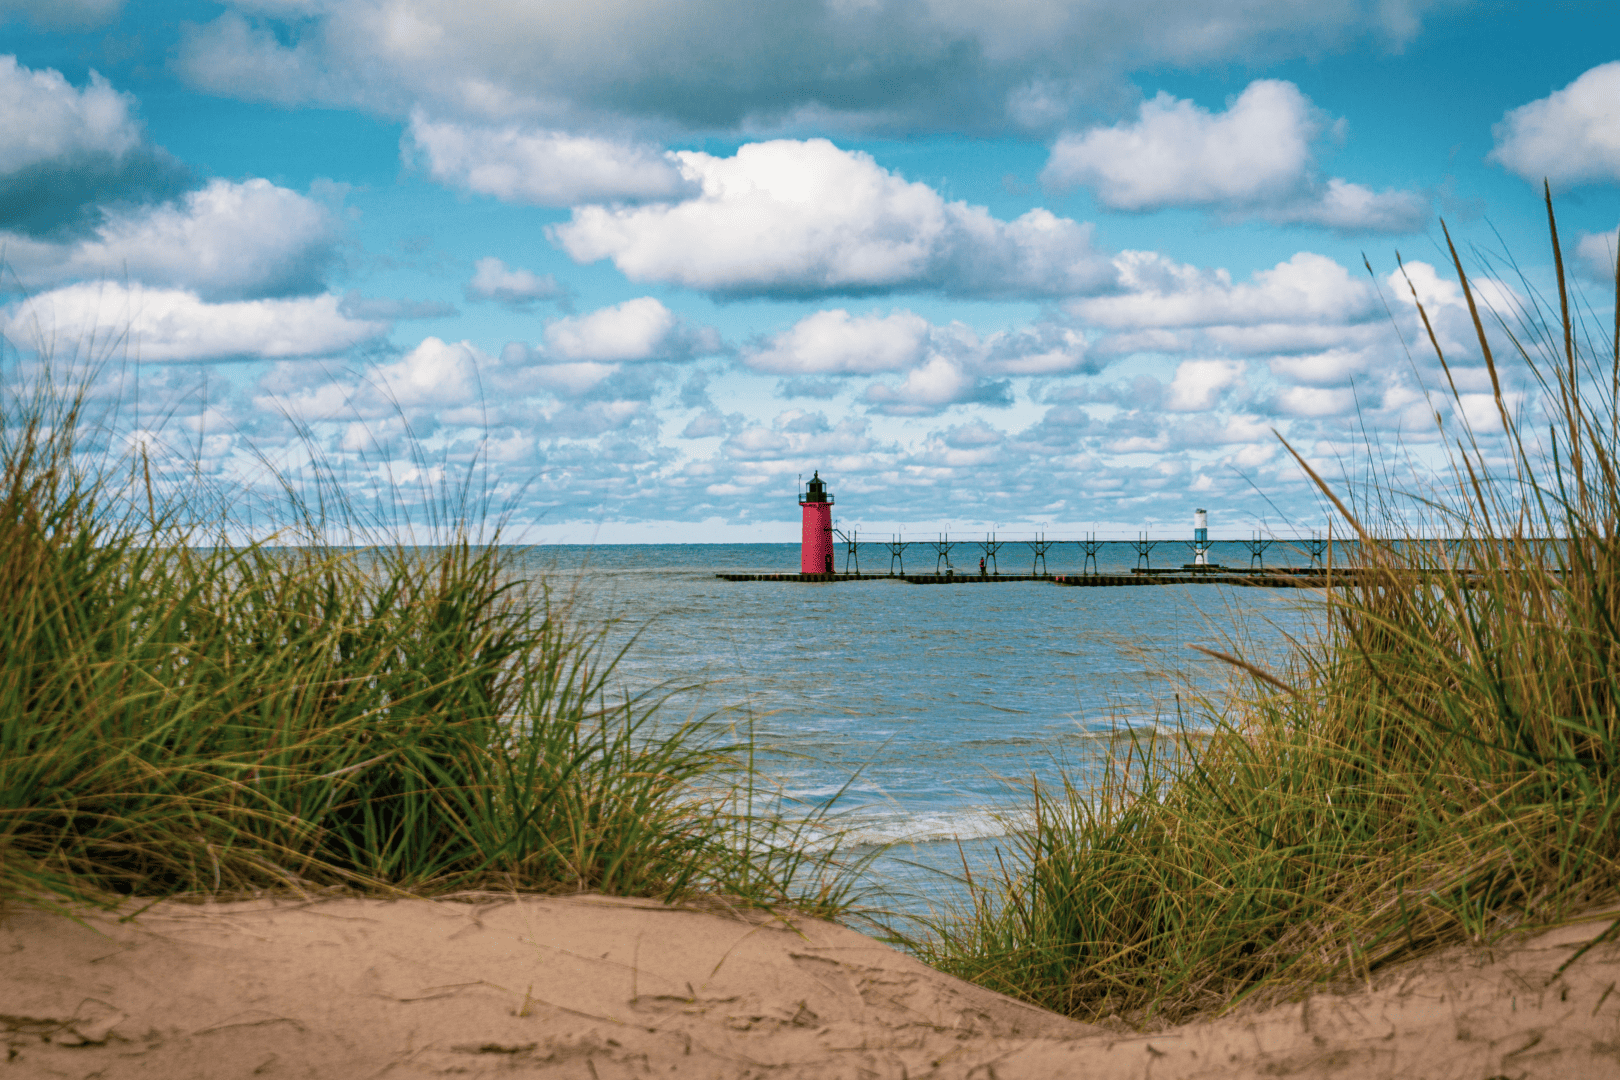 Distant views of South Haven LIghthouse with sandy beach and grasses